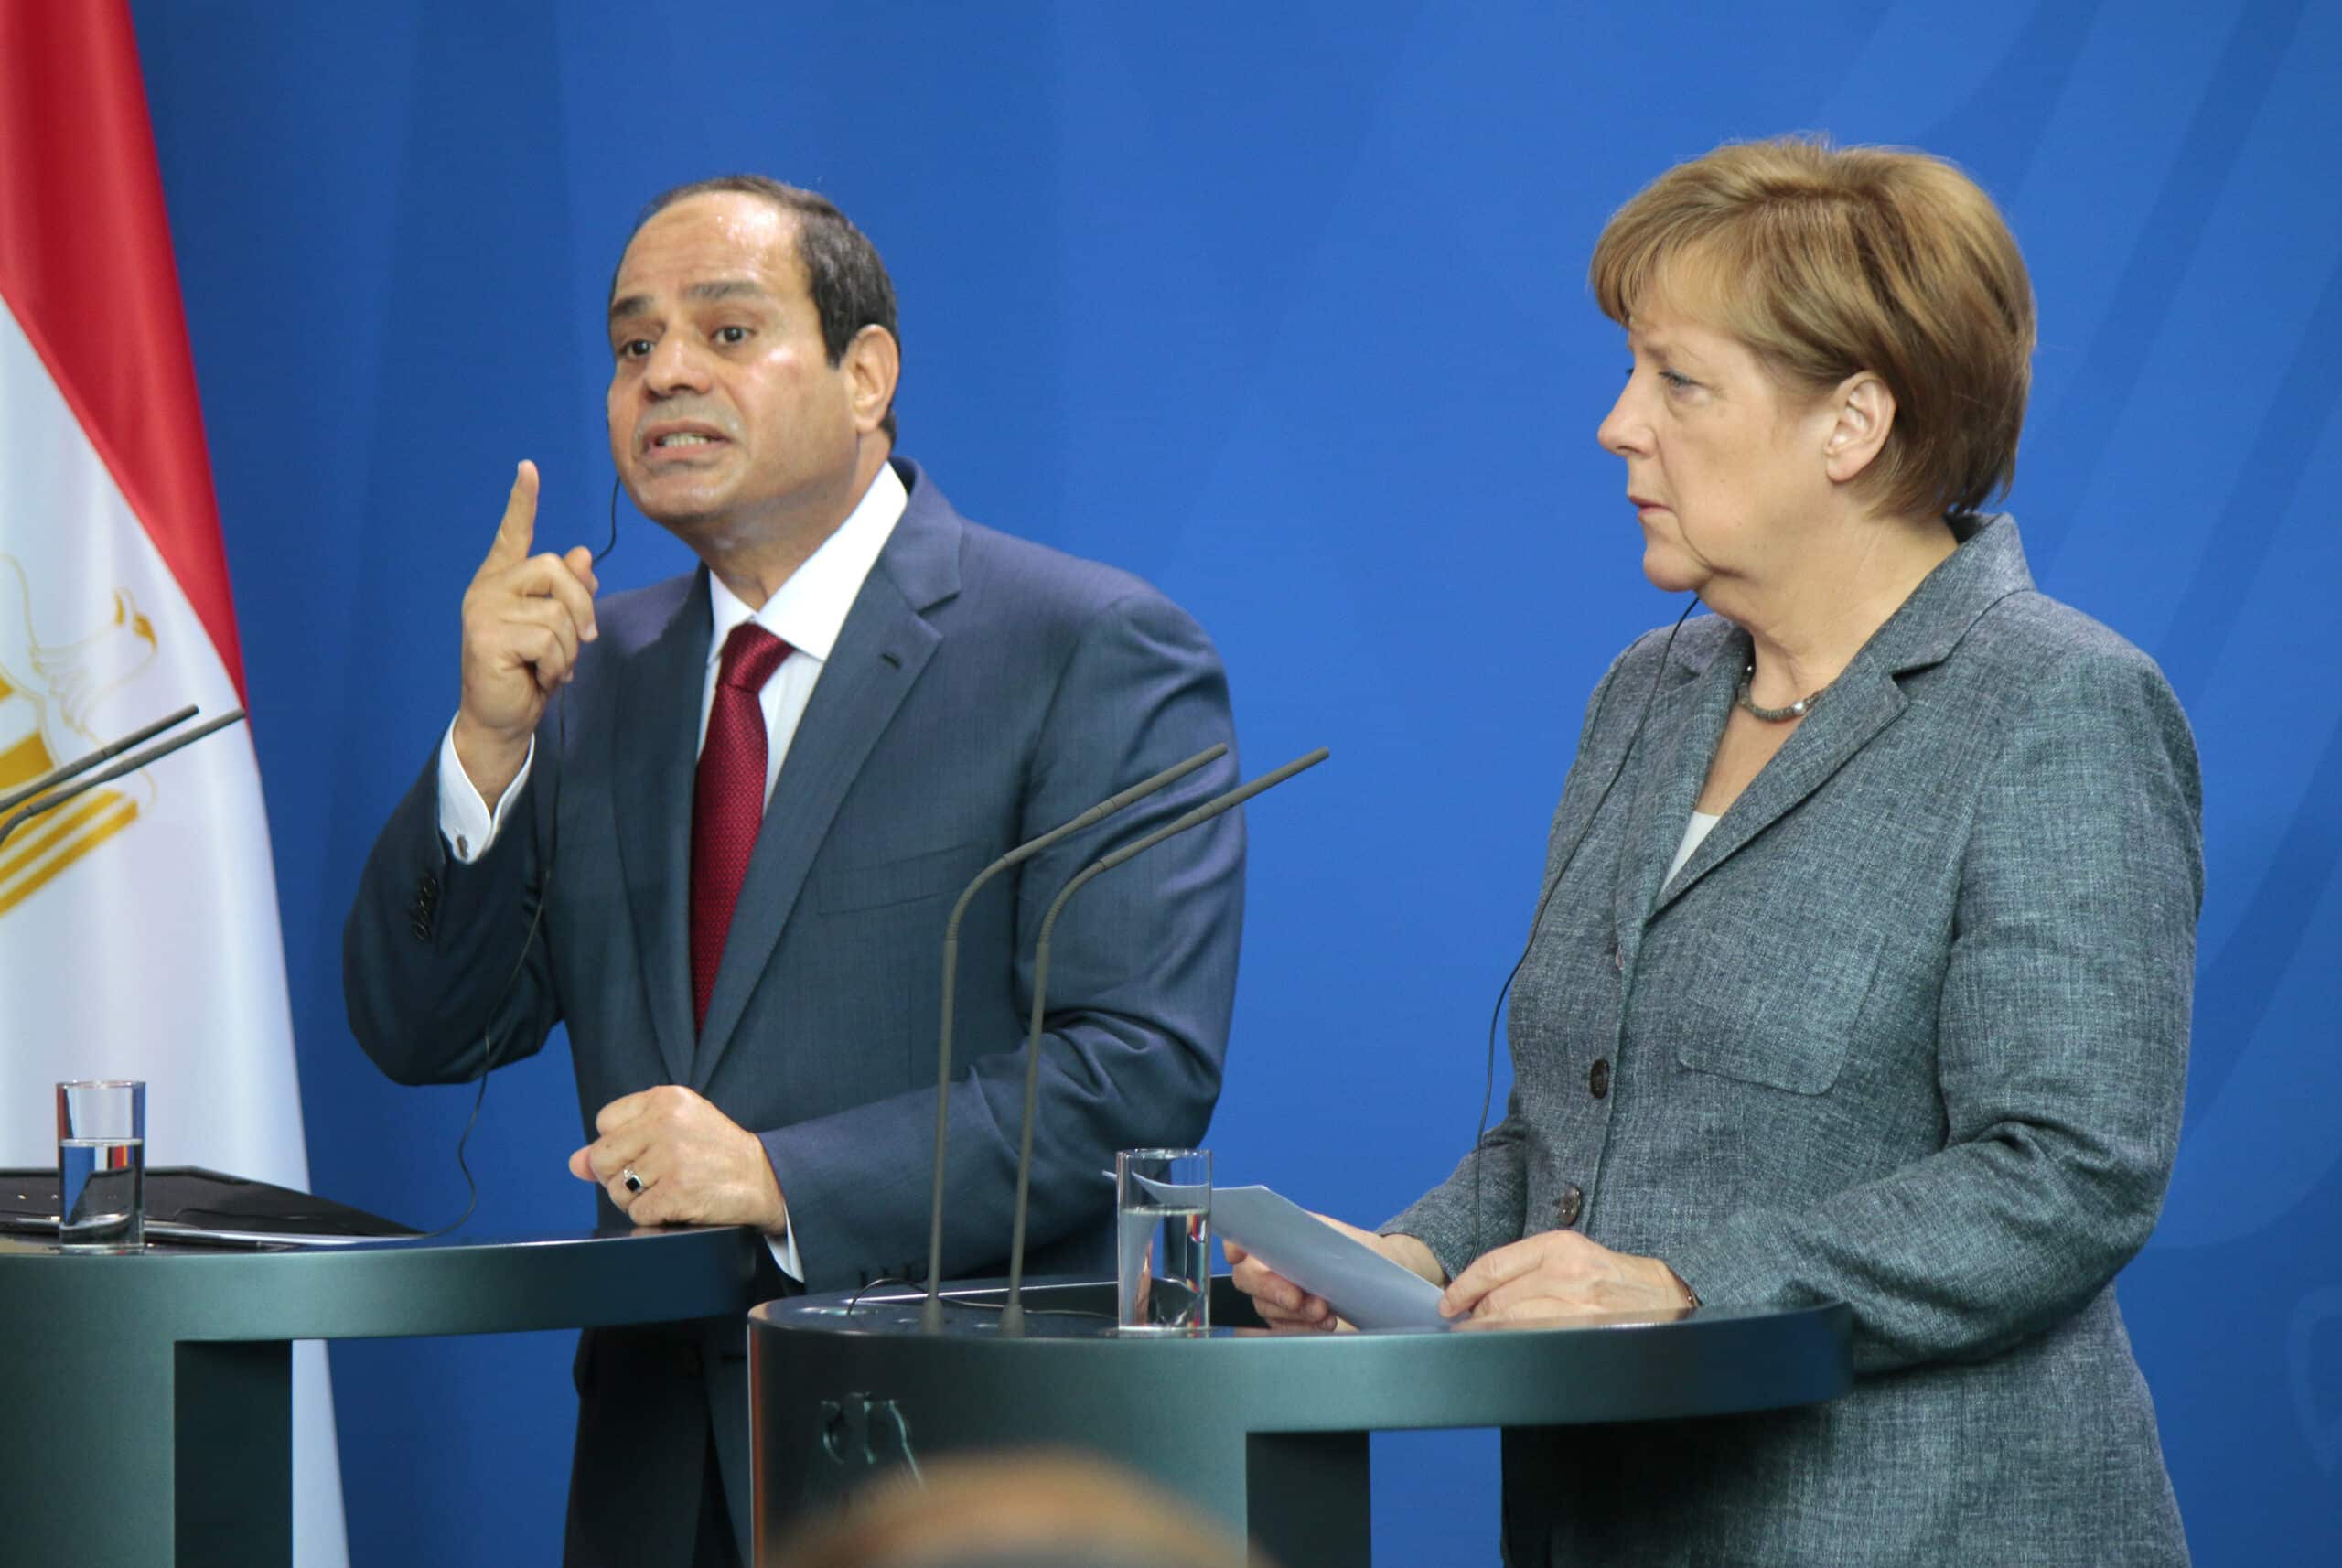 Egyptian president Abd al-Fattah al-Sisi together with the Chancellor of Germany, Angela Merkel.